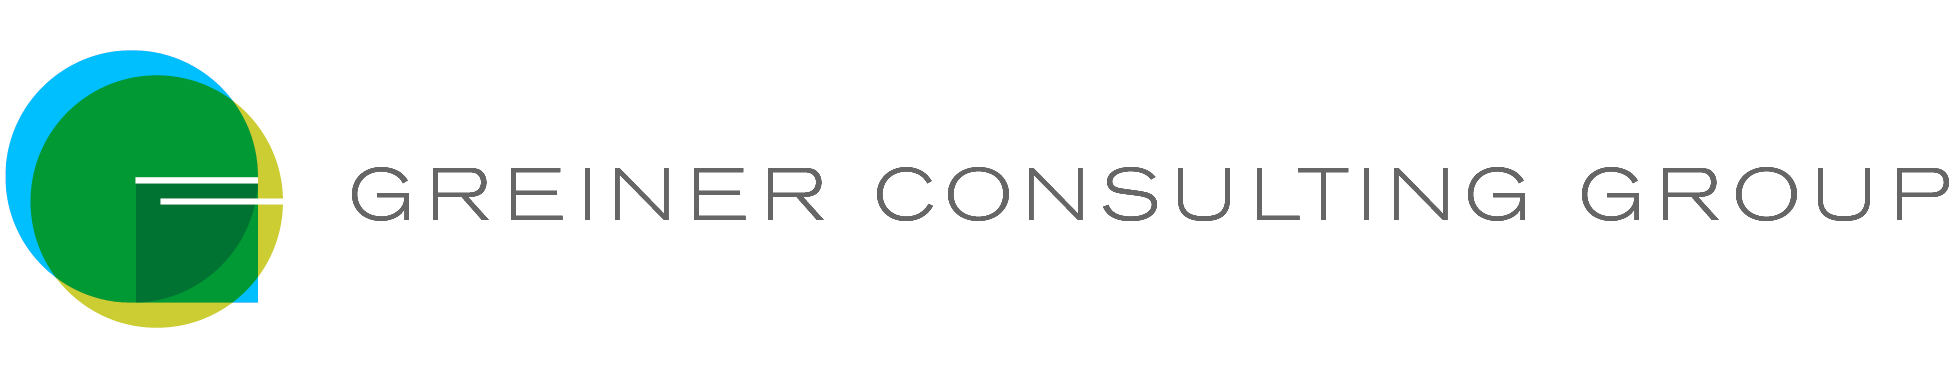 Greiner Consulting Group